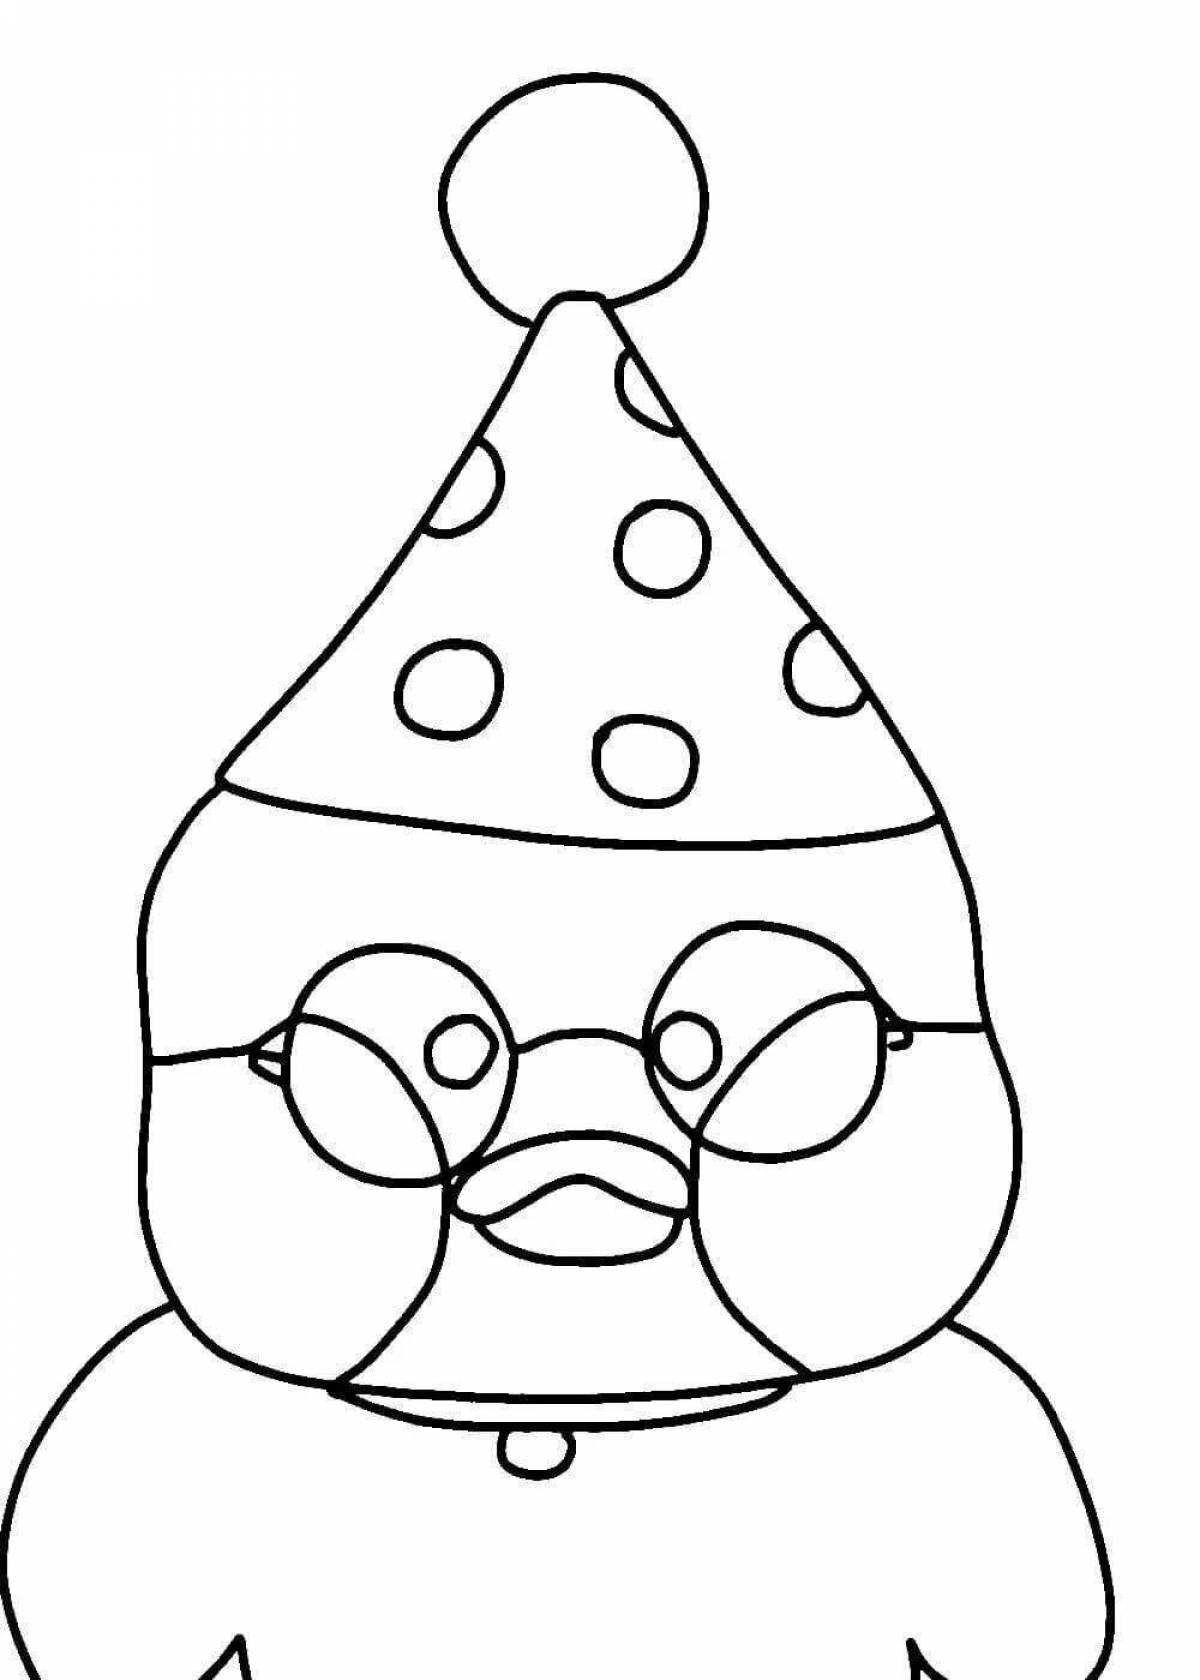 Lafanfan playful duck coloring page